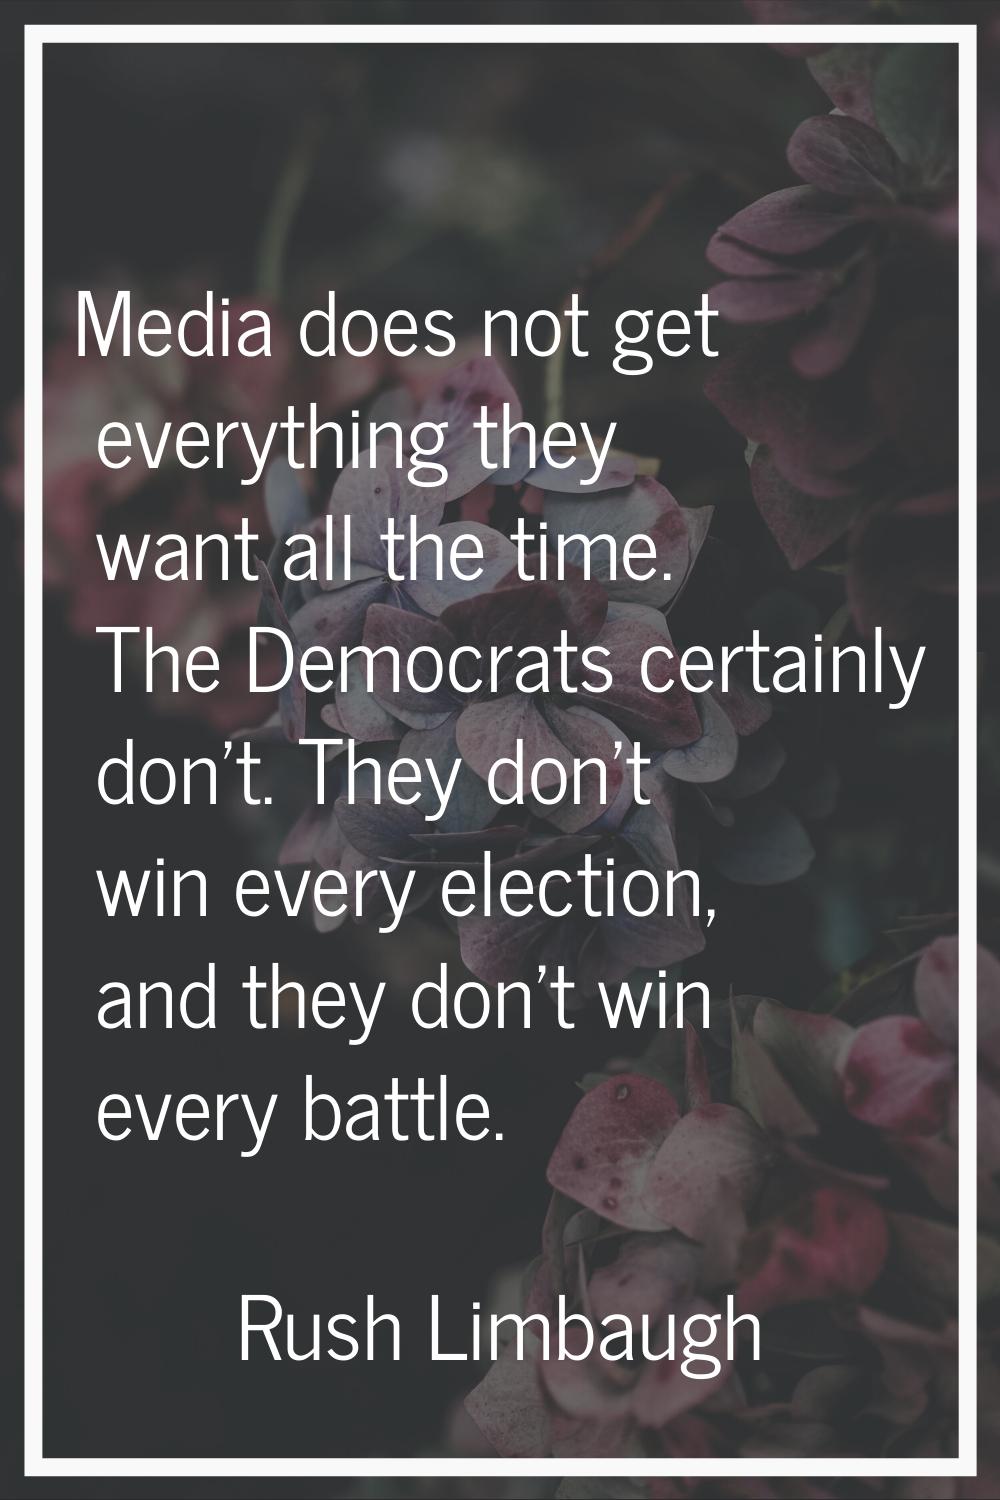 Media does not get everything they want all the time. The Democrats certainly don't. They don't win